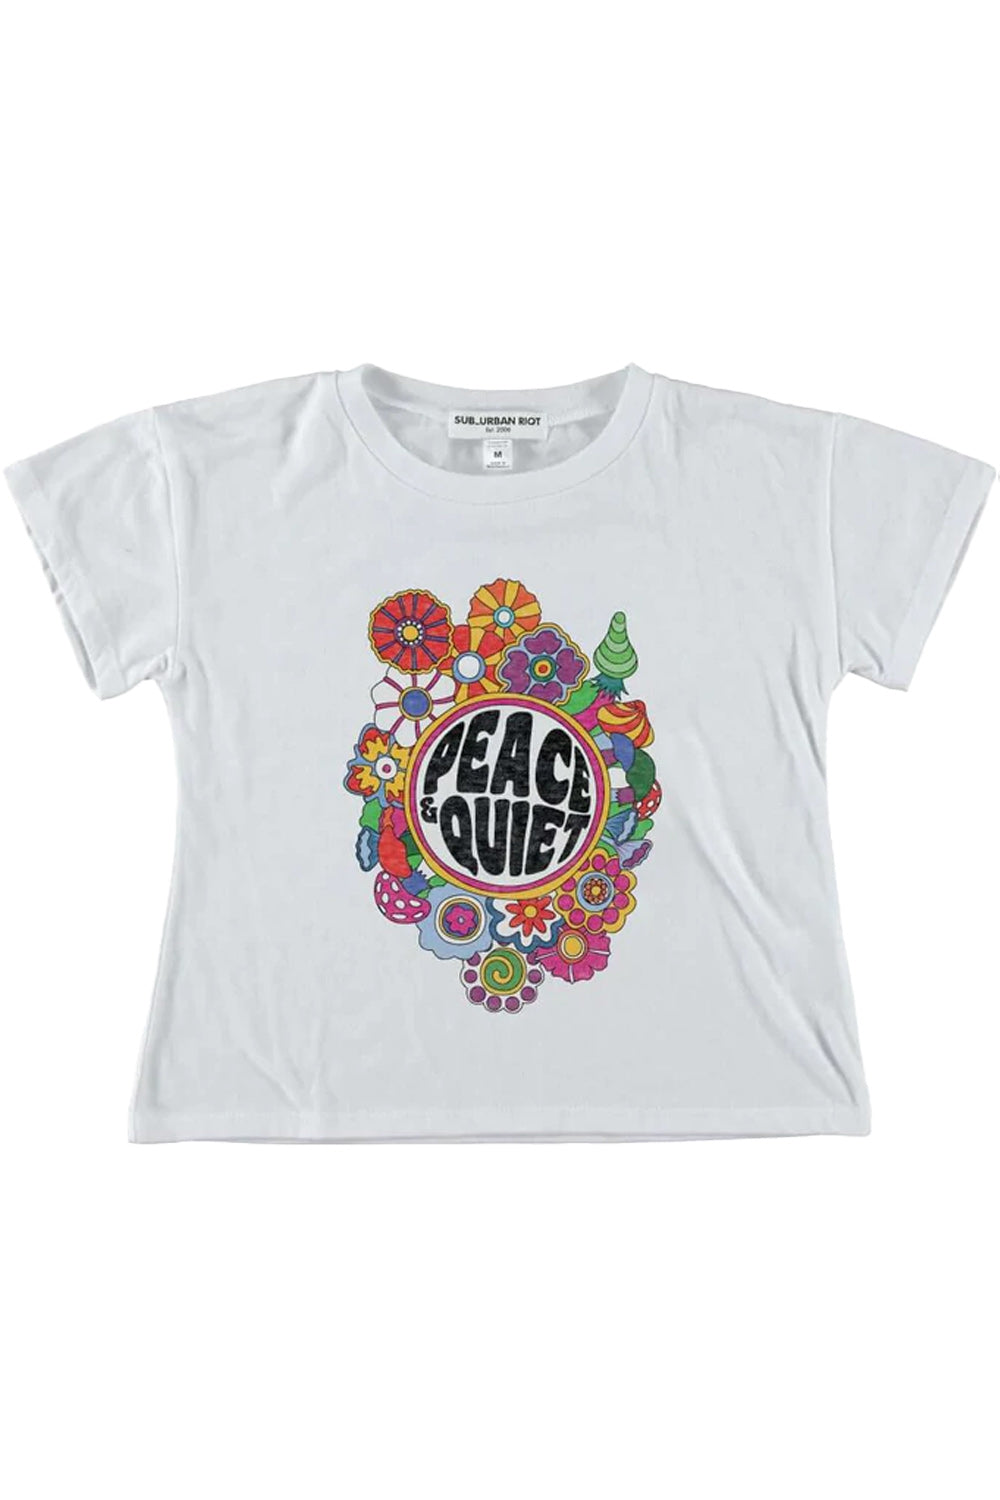 PEACE AND QUIET YOUTH SIZE CROP TEE